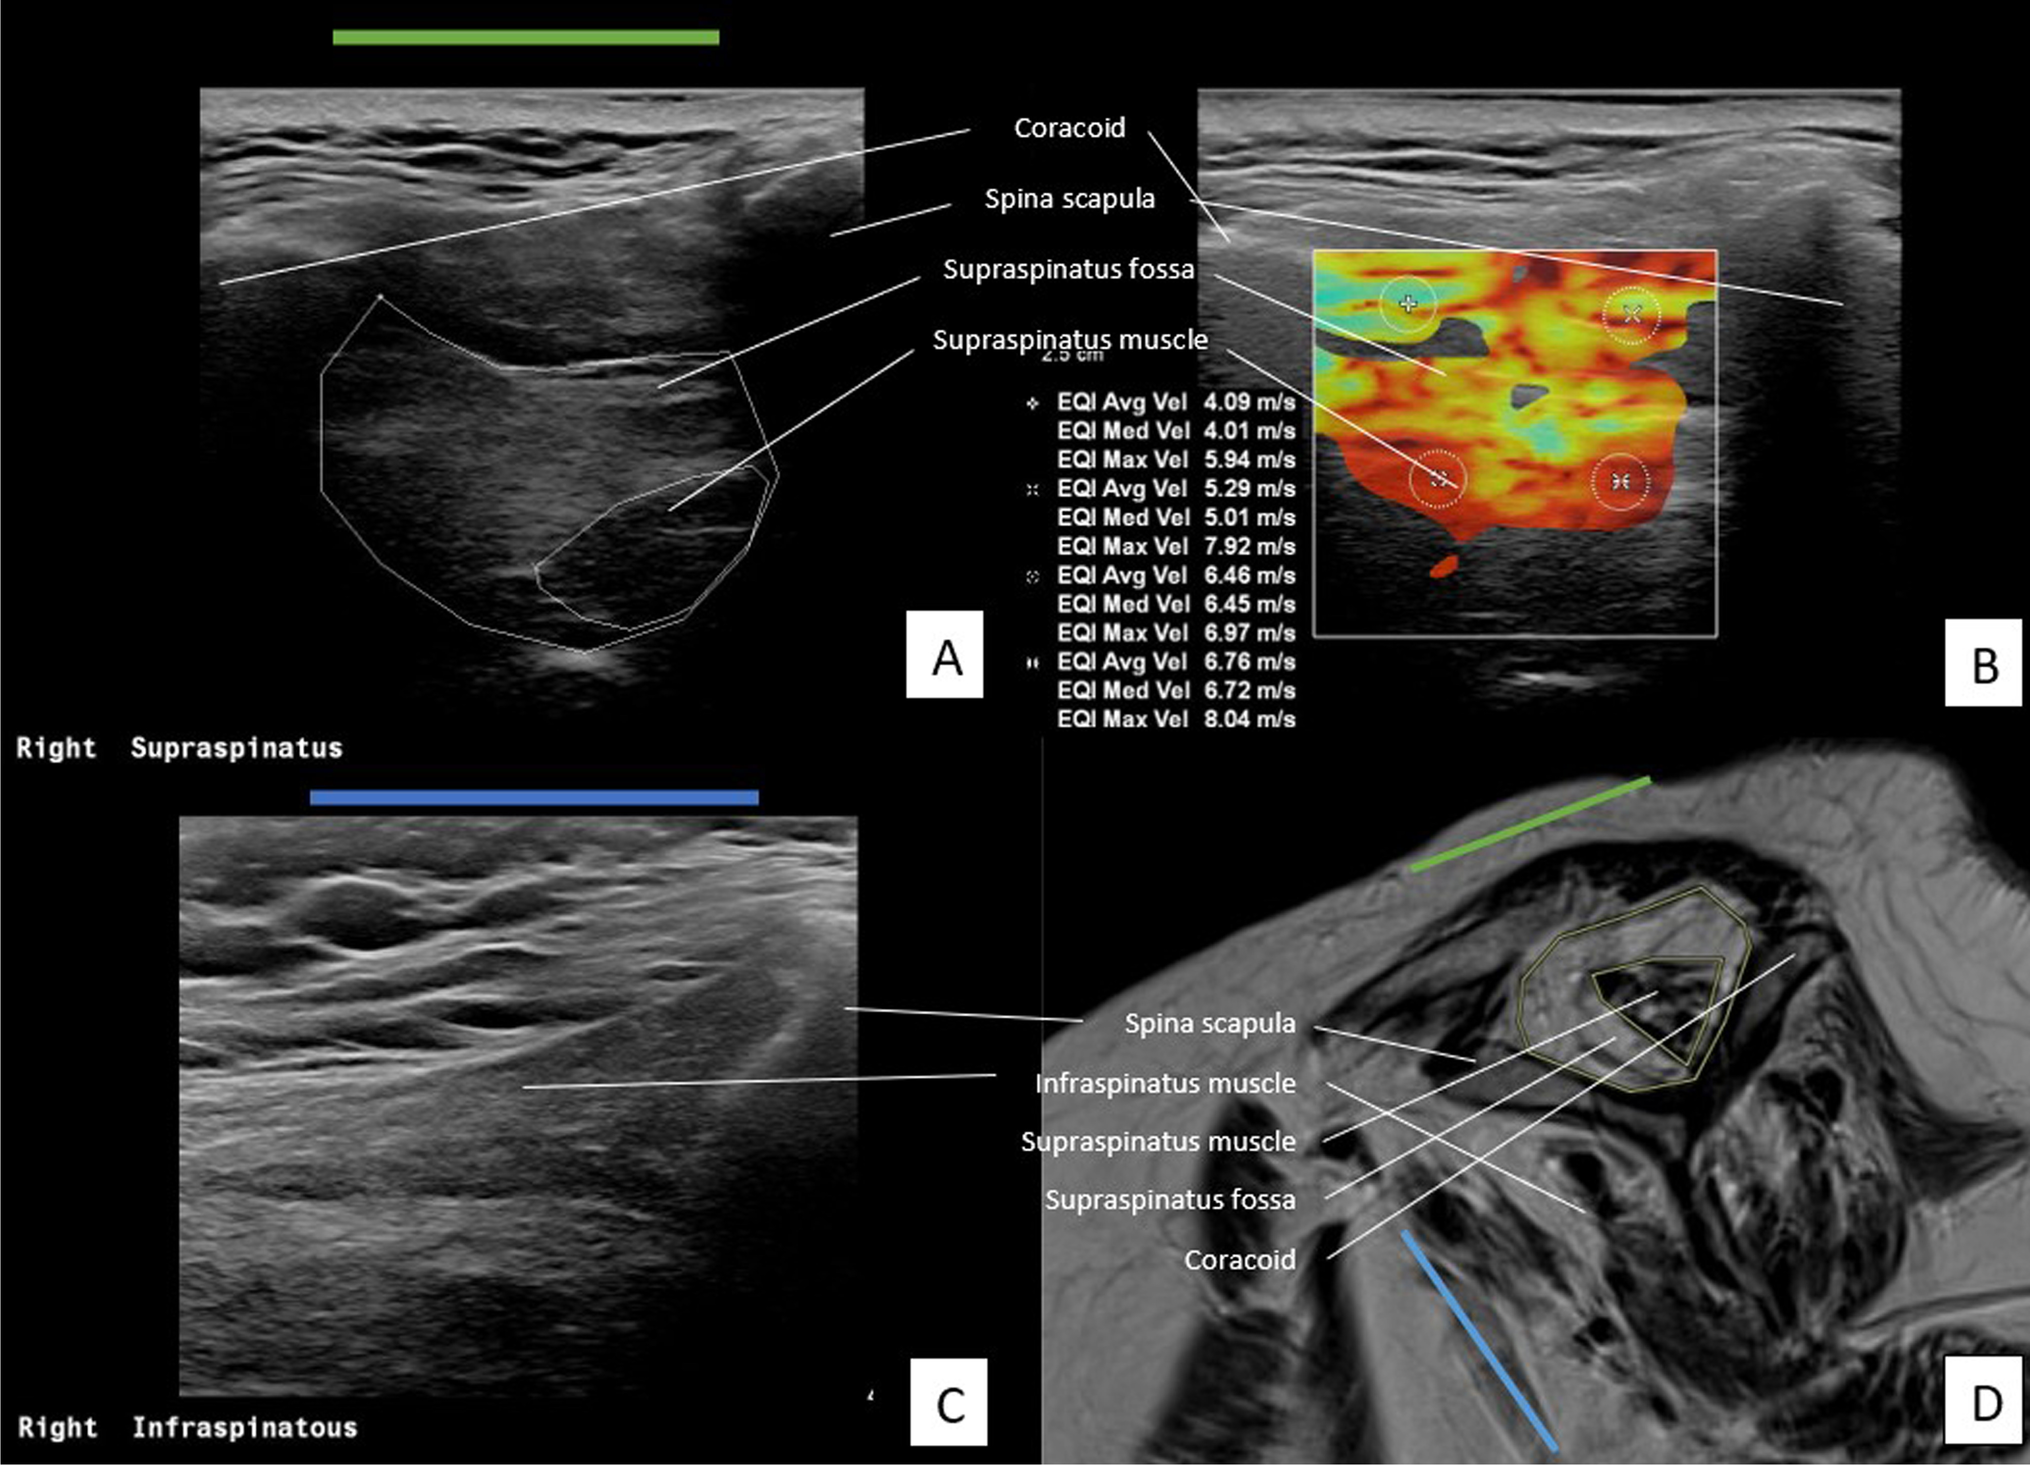 The validity of ultrasound and shear wave elastography to assess the quality of the rotator cuff